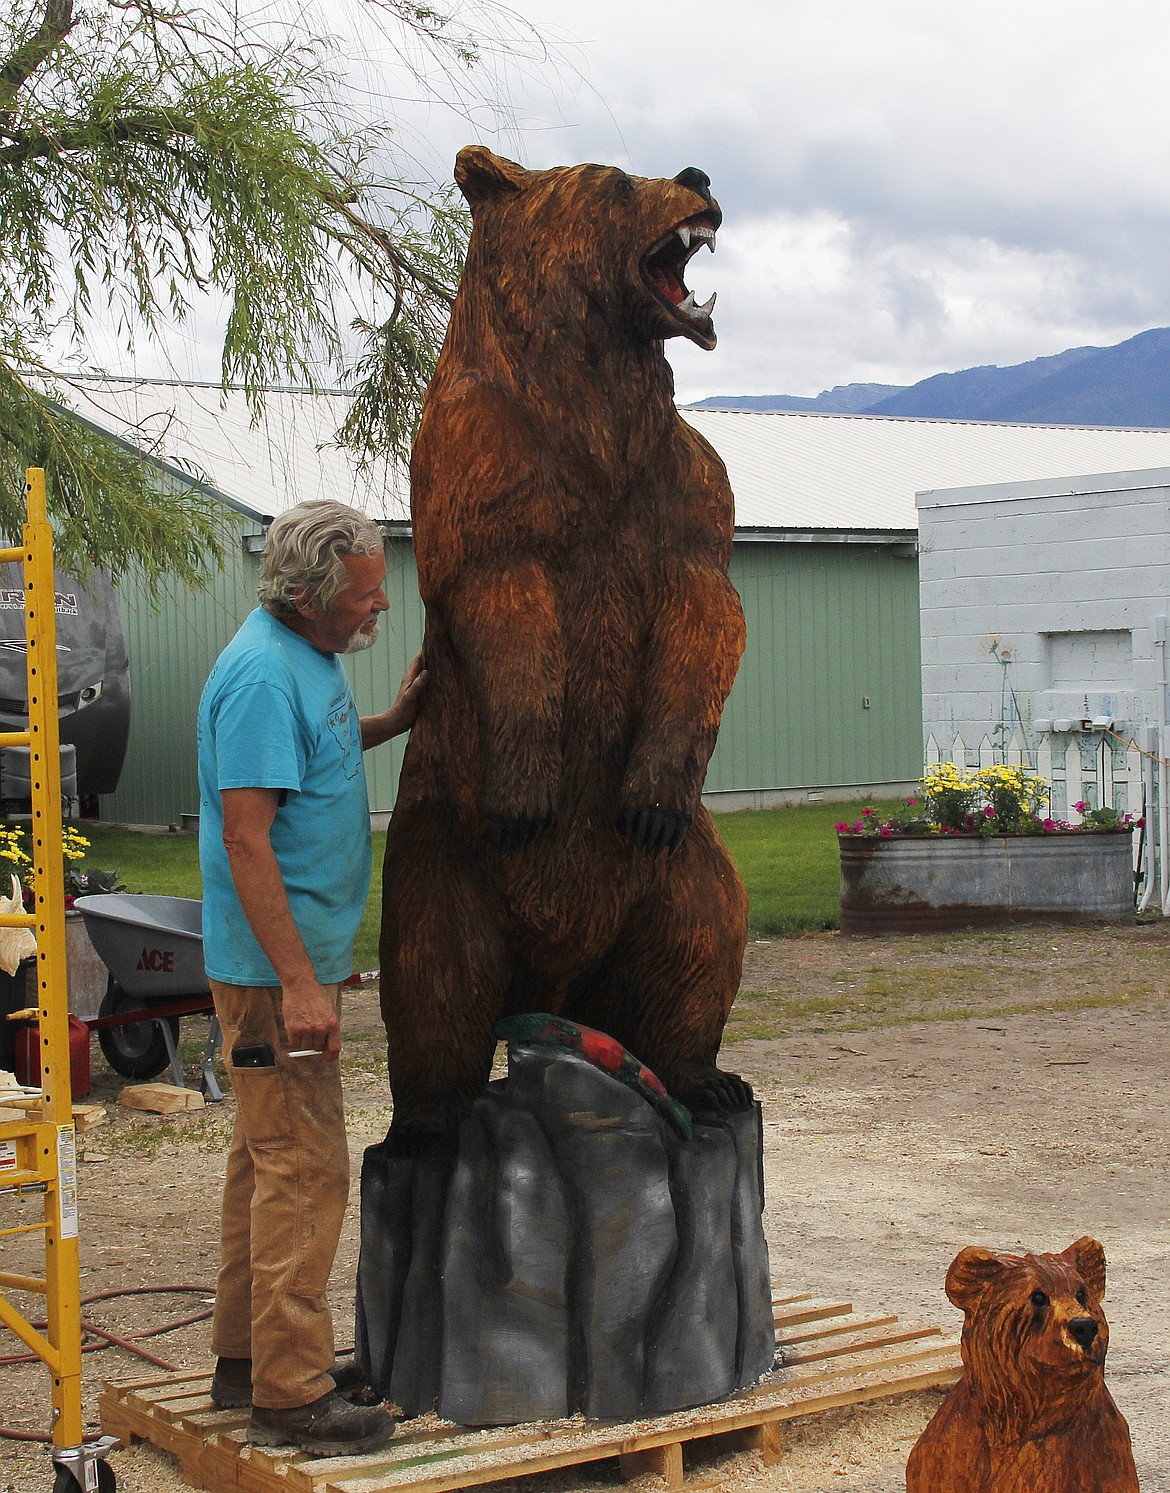 Todd Coats of Bigfork carved his way to glory last weekend, winning first prize at the Ronan Chainsaw Rendezvous. His grizzly bear sculpture brought in $3,800 at Sunday's auction, purchased by Stella's Bakery and Deli. A portion of the funds go back to the community through the contest sponsor, the Ronan Area Chamber of Commerce. (Courtesy of Susan Lake)